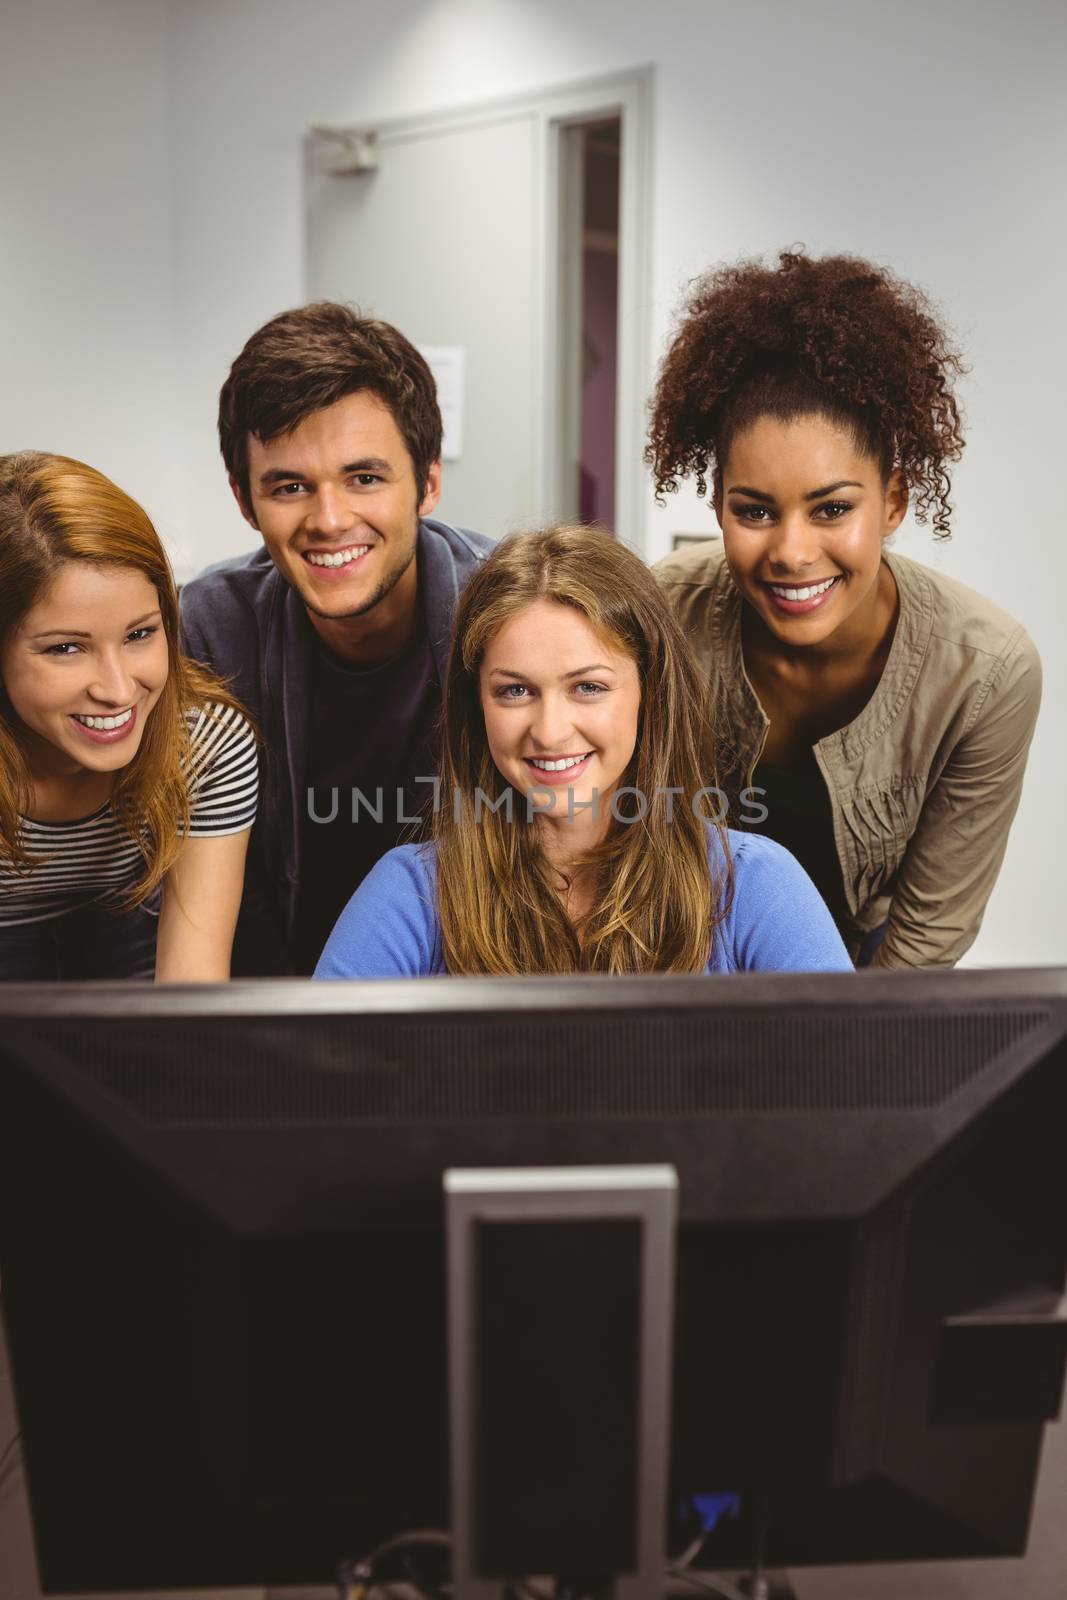 Smiling students using computer together looking at camera by Wavebreakmedia